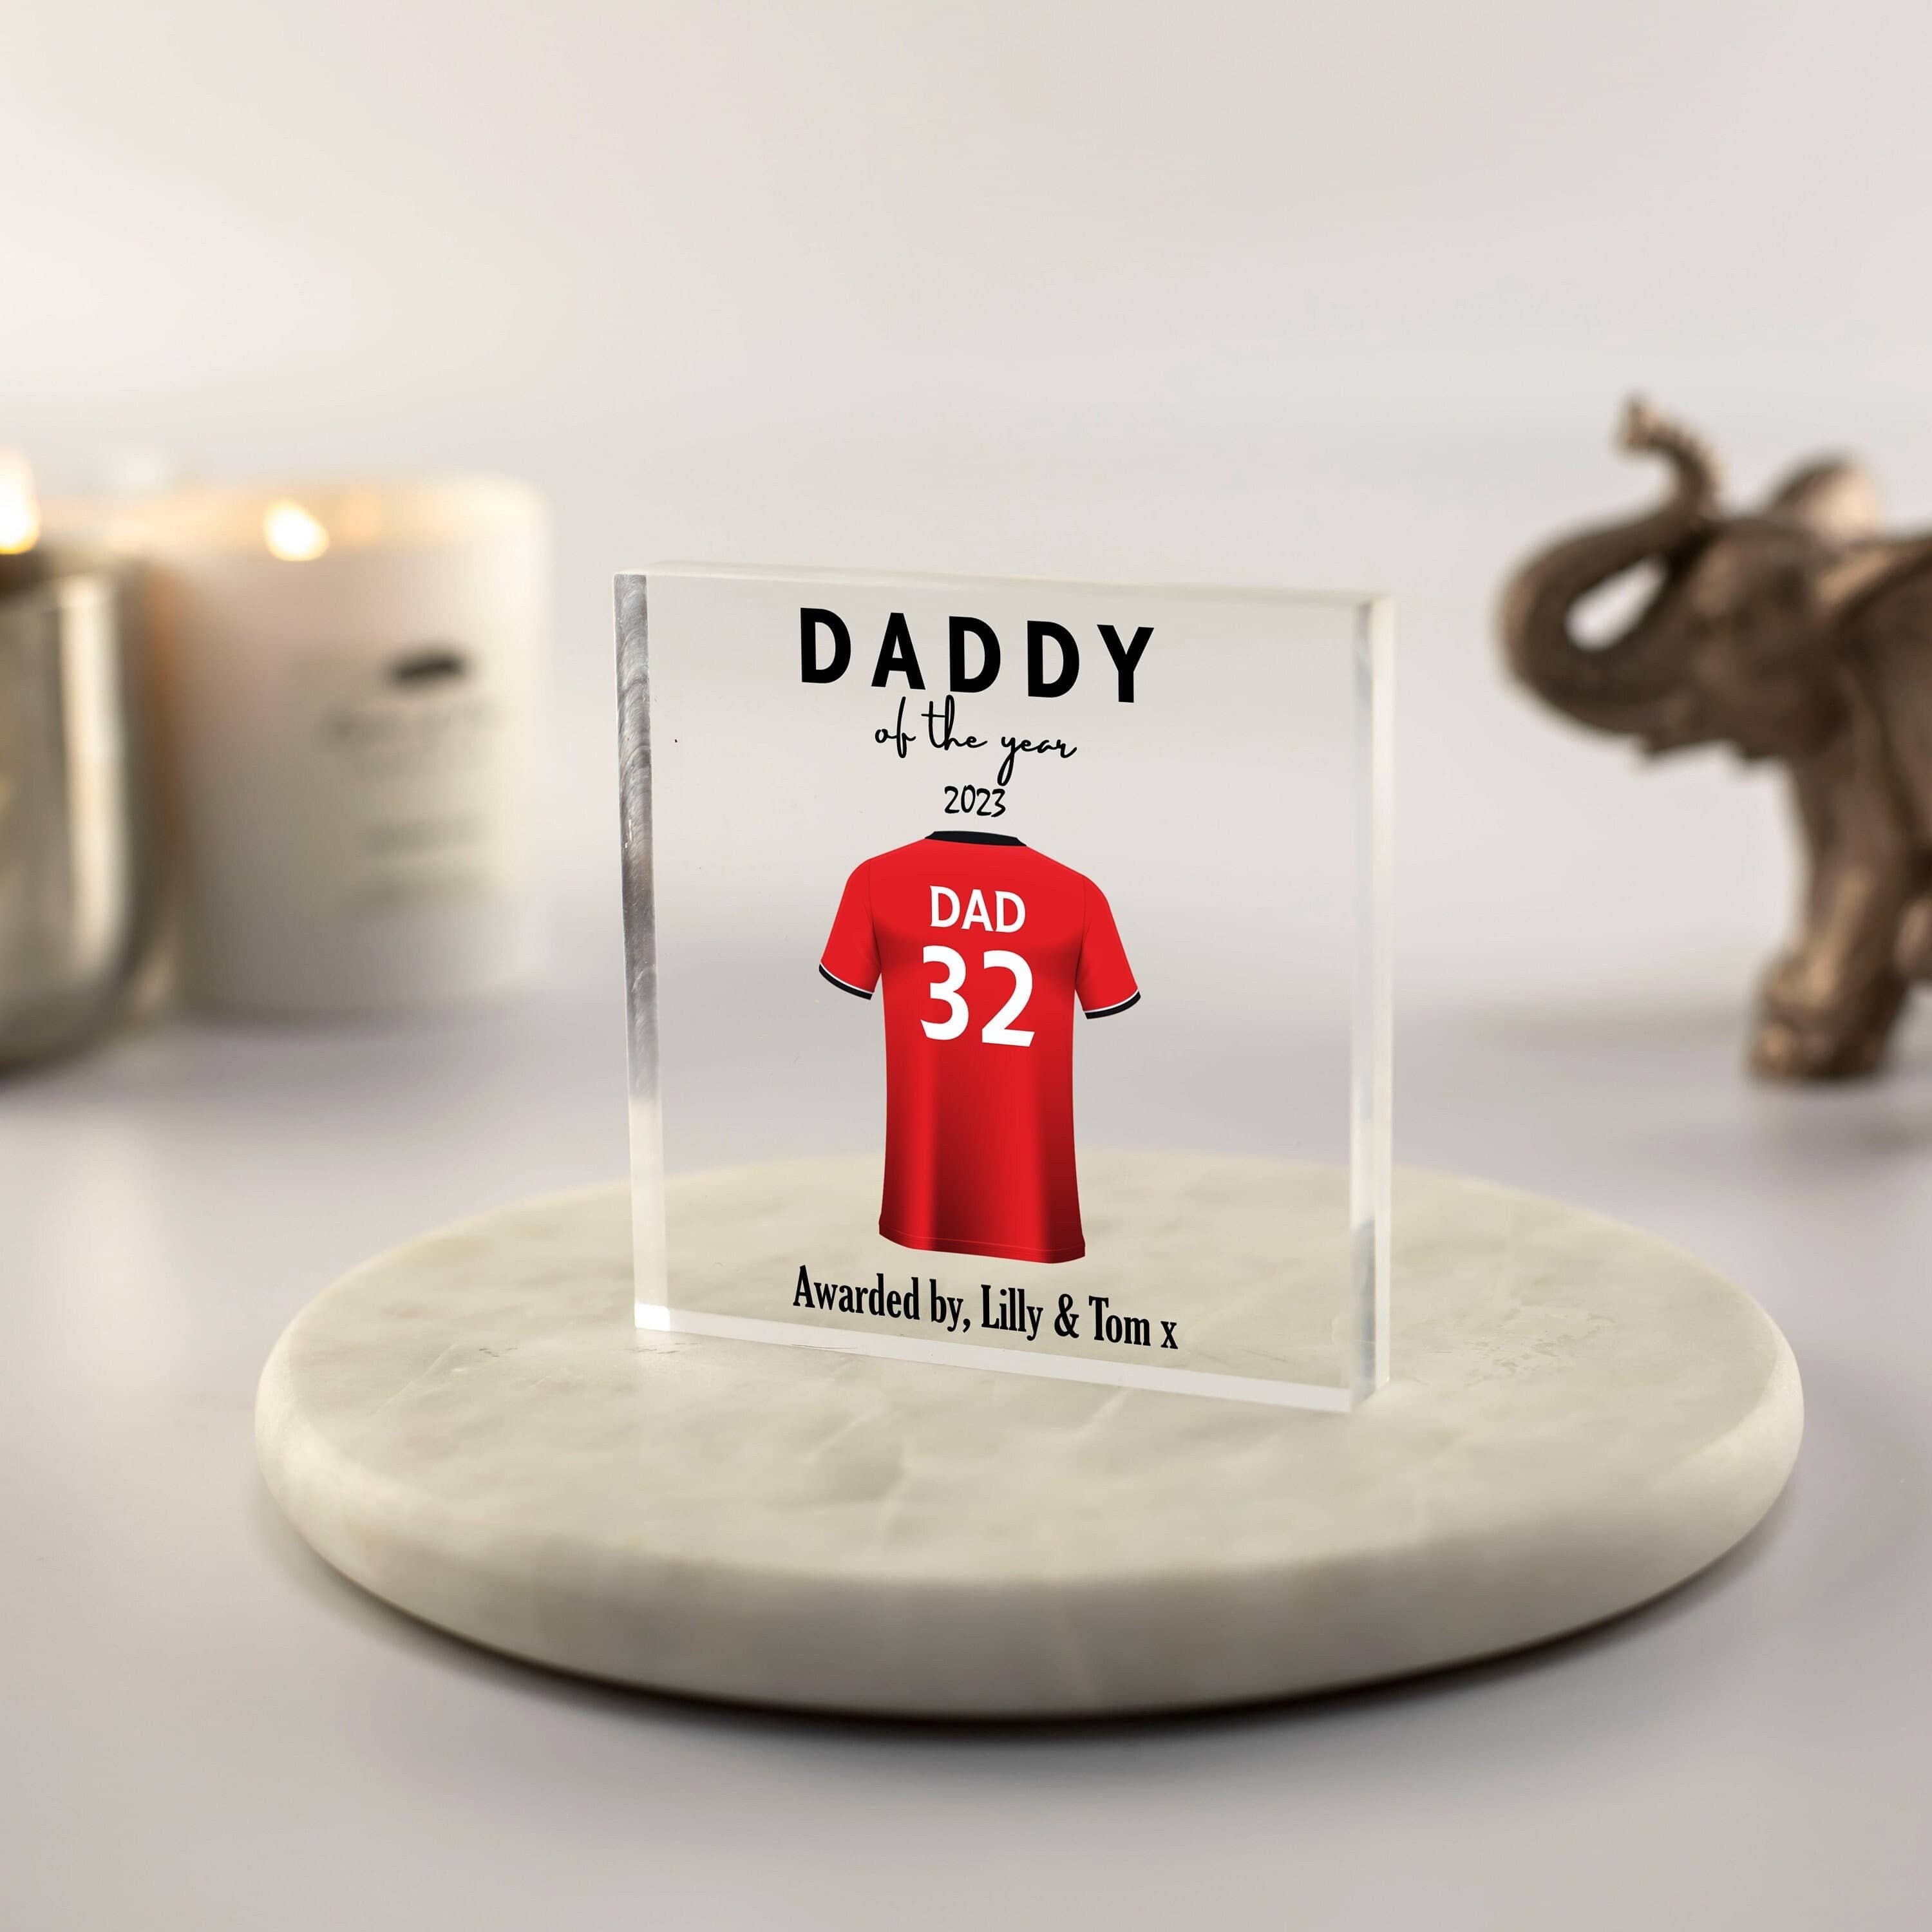 Personalised Football Shirt Print, Father's Day Gift, Daddy Birthday Gift, Best Dad Present, Football Gifts, No.1 Dad, Gifts for Him, Custom